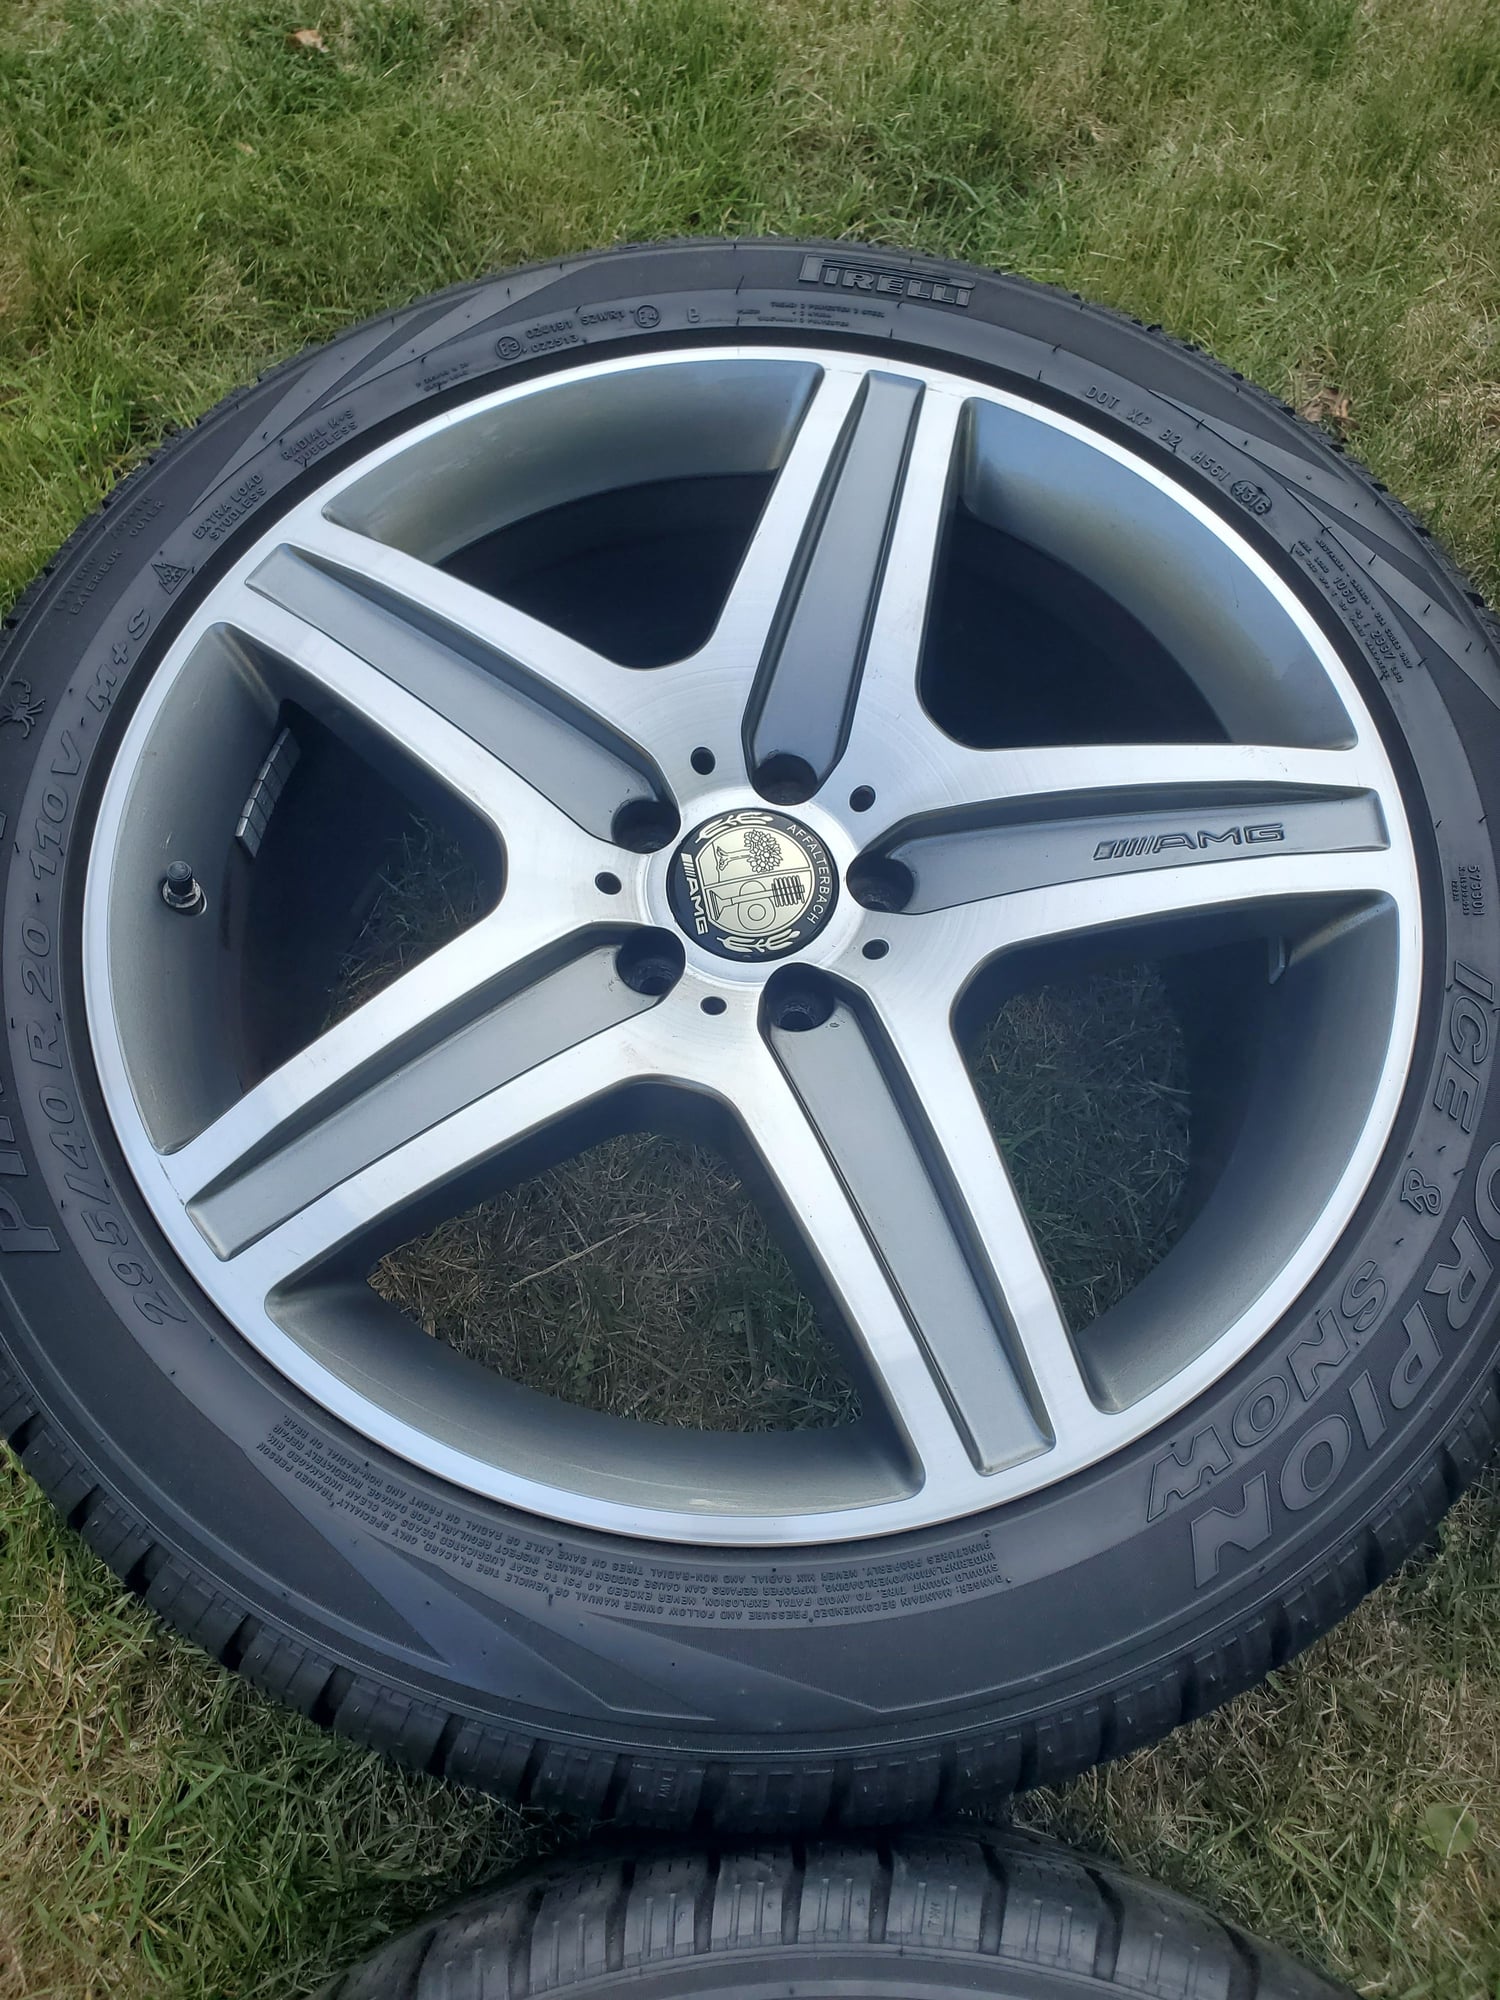 Wheels and Tires/Axles - Rare AMG Wheels for ML63 - Used - 2006 to 2011 Mercedes-Benz ML63 AMG - Fairfield, CT 06890, United States